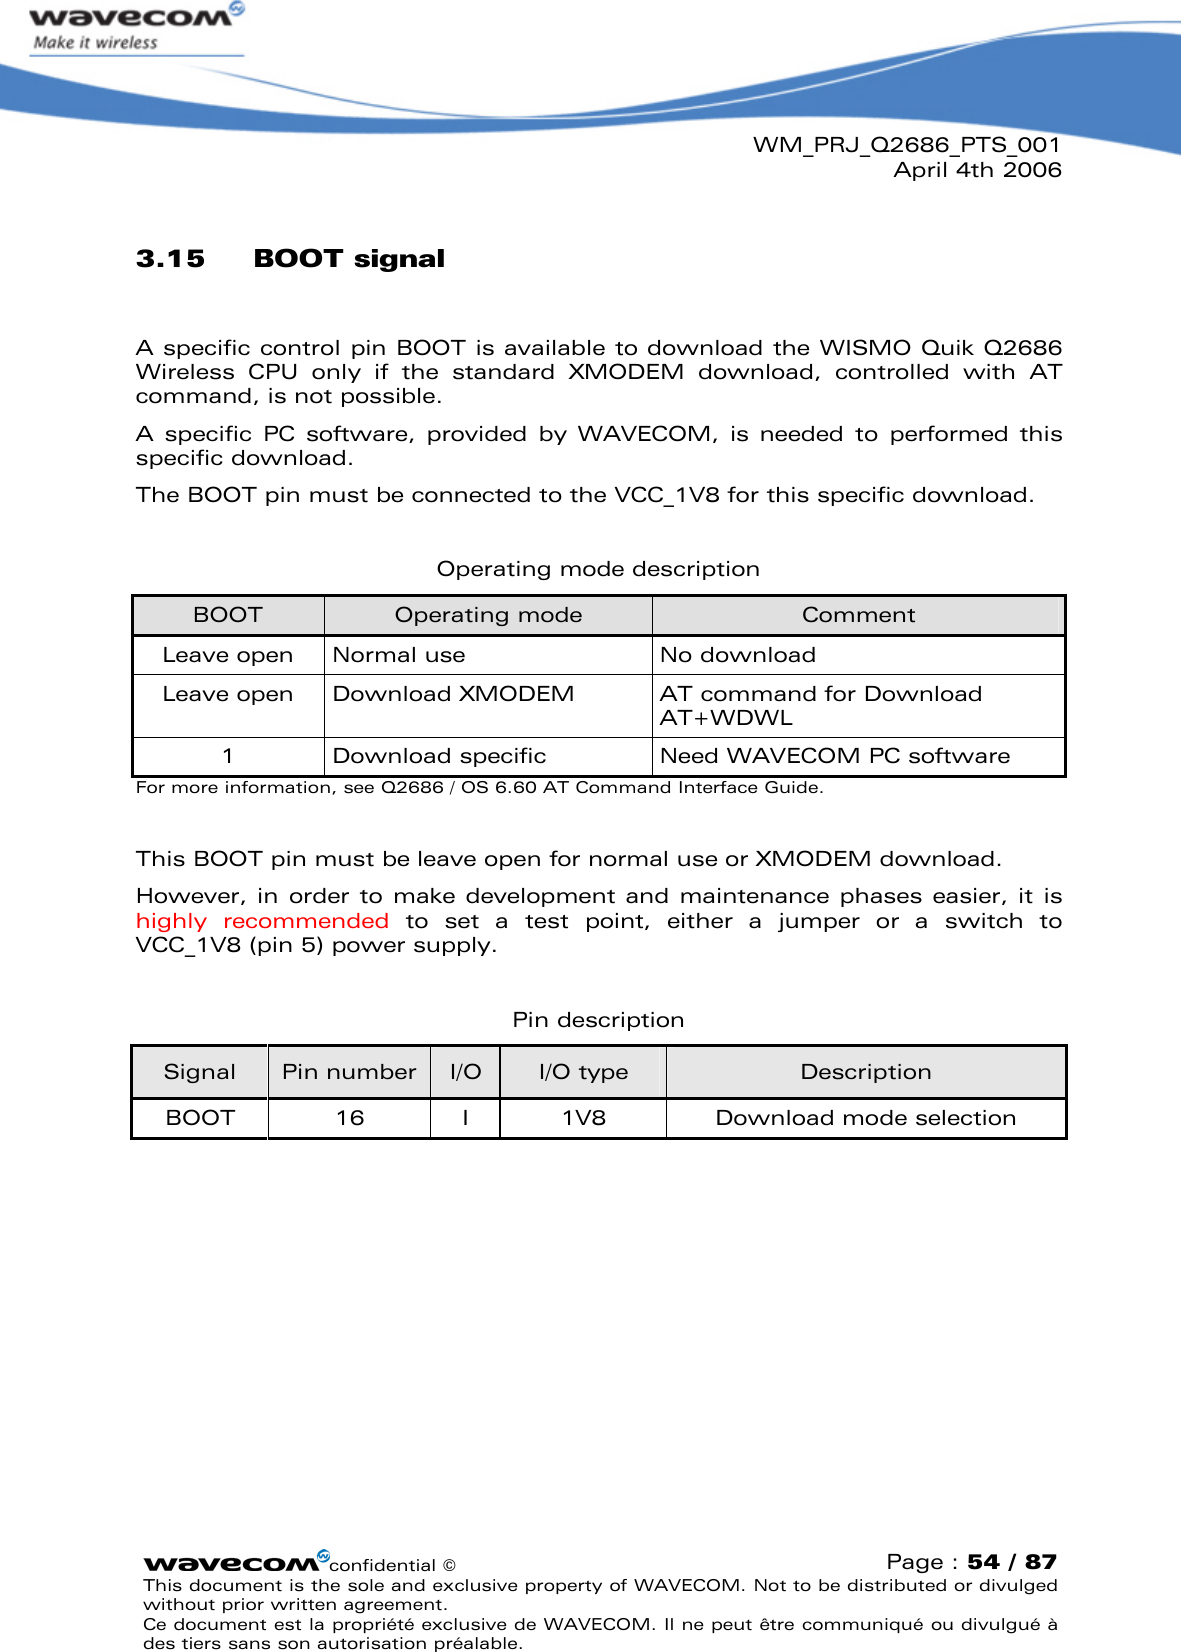 WM_PRJ_Q2686_PTS_001April 4th 2006confidential ©Page : 54 / 87This document is the sole and exclusive property of WAVECOM. Not to be distributed or divulged without prior written agreement. Ce document est la propriété exclusive de WAVECOM. Il ne peut être communiqué ou divulgué à des tiers sans son autorisation préalable.3.15 BOOT signalA specific control pin BOOT is available to download the WISMO Quik Q2686 Wireless  CPU  only  if  the  standard  XMODEM  download,  controlled  with  AT command, is not possible.A  specific  PC  software,  provided  by  WAVECOM,  is  needed  to  performed this specific download.The BOOT pin must be connected to the VCC_1V8 for this specific download.Operating mode descriptionBOOT Operating mode CommentLeave open Normal use No downloadLeave open Download XMODEM AT command for Download AT+WDWL1Download specific Need WAVECOM PC softwareFor more information, see Q2686 / OS 6.60 AT Command Interface Guide.This BOOT pin must be leave open for normal use or XMODEM download.However, in order to make development  and maintenance phases easier, it is highly  recommended to  set  a  test  point,  either  a  jumper  or  a  switch  to VCC_1V8 (pin 5) power supply.Pin descriptionSignal Pin number I/O I/O type DescriptionBOOT 16 I 1V8 Download mode selection